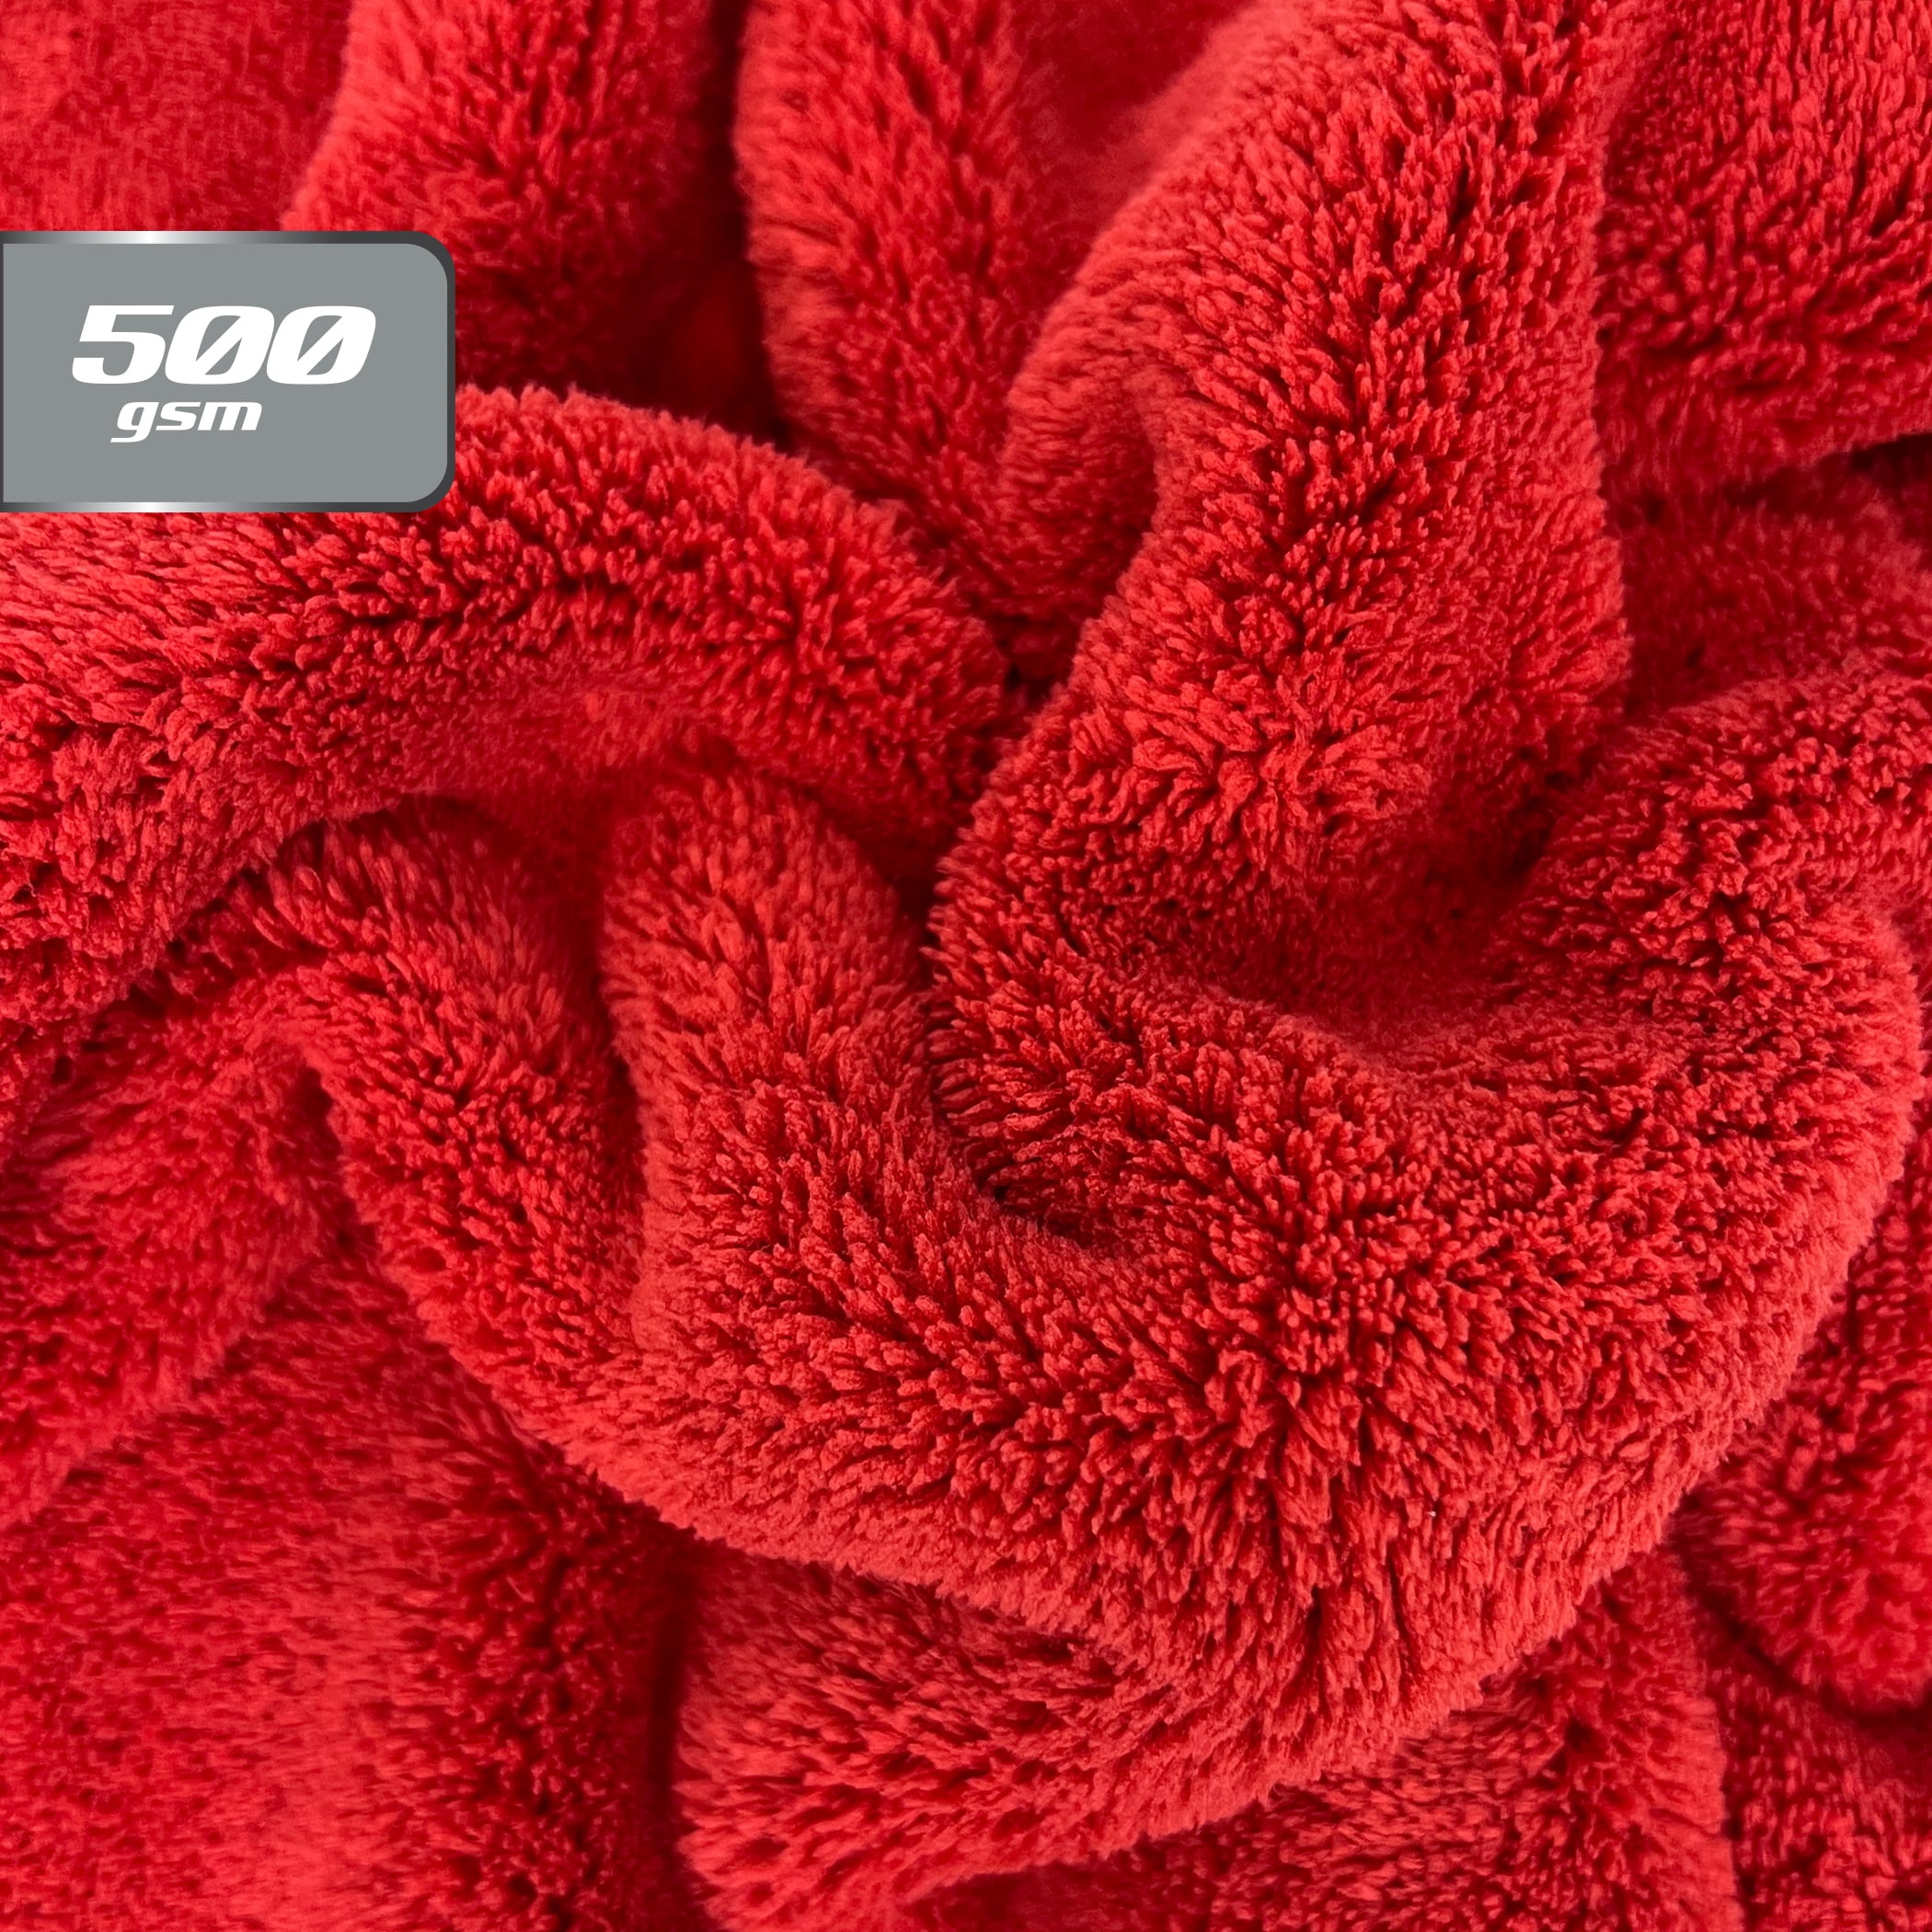 100% Microfiber Coral Fleece Towels with Compound Constructure